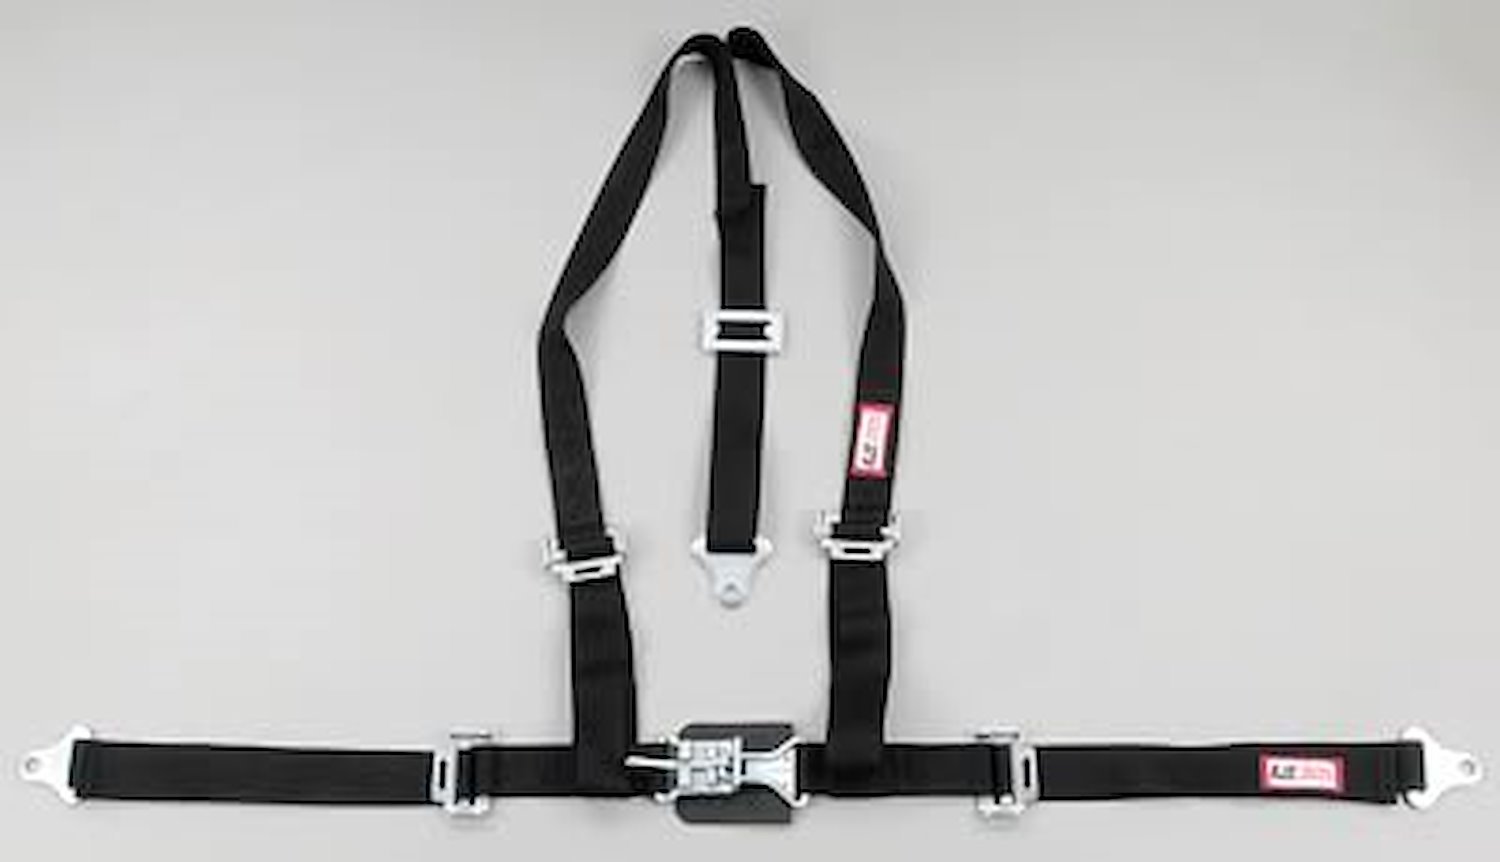 NON-SFI L&L HARNESS 3 PULL UP Lap Belt SEWN IN 2 S.H. Individual ROLL BAR Mount ALL WRAP ENDS BLUE